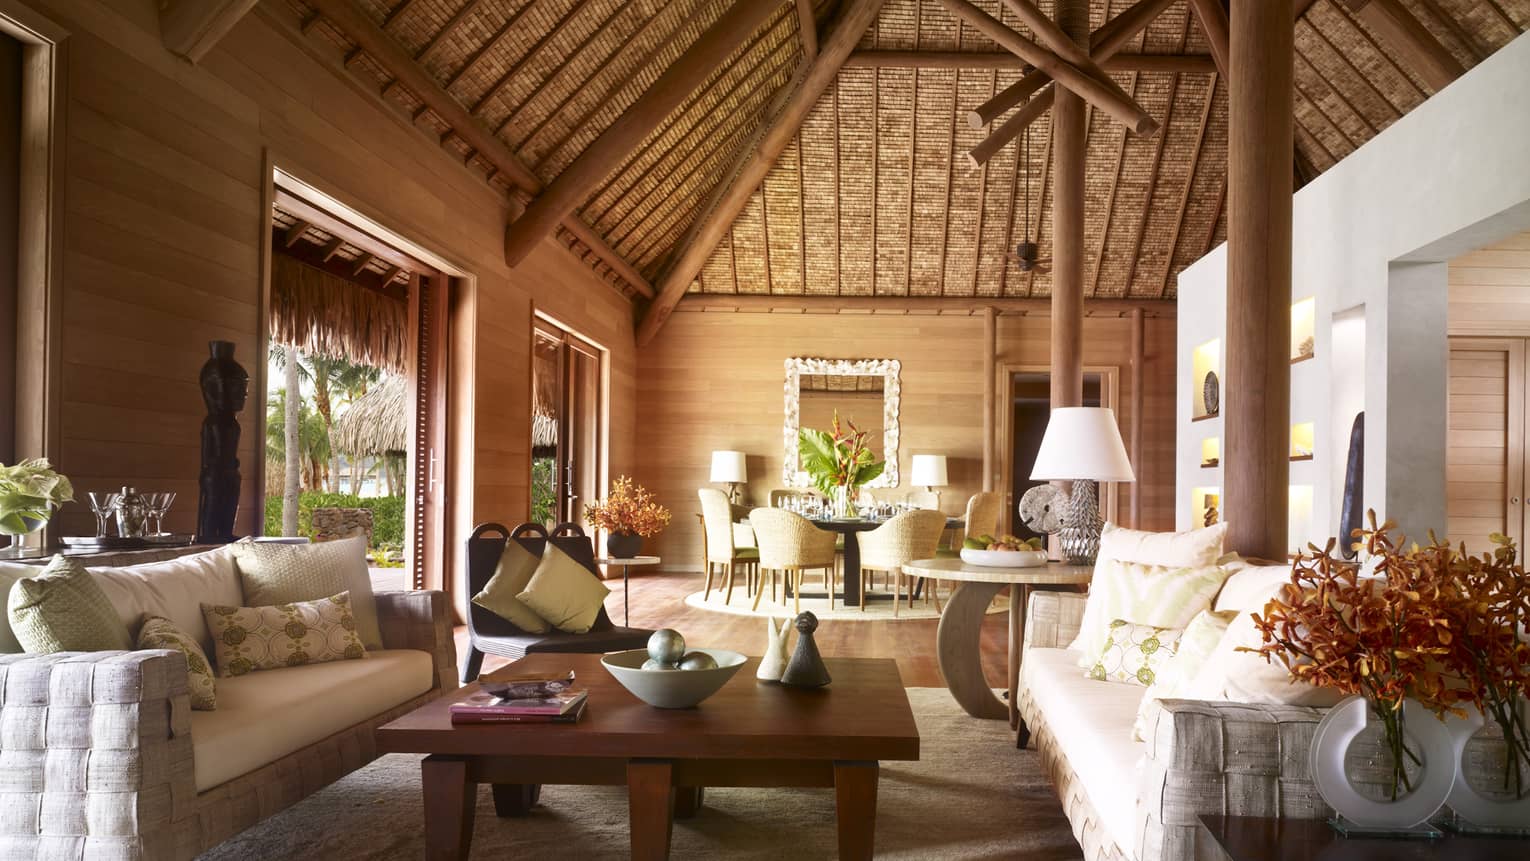 Large, bright bungalow with thatched cathedral ceiling, white sofas, Polynesian art 